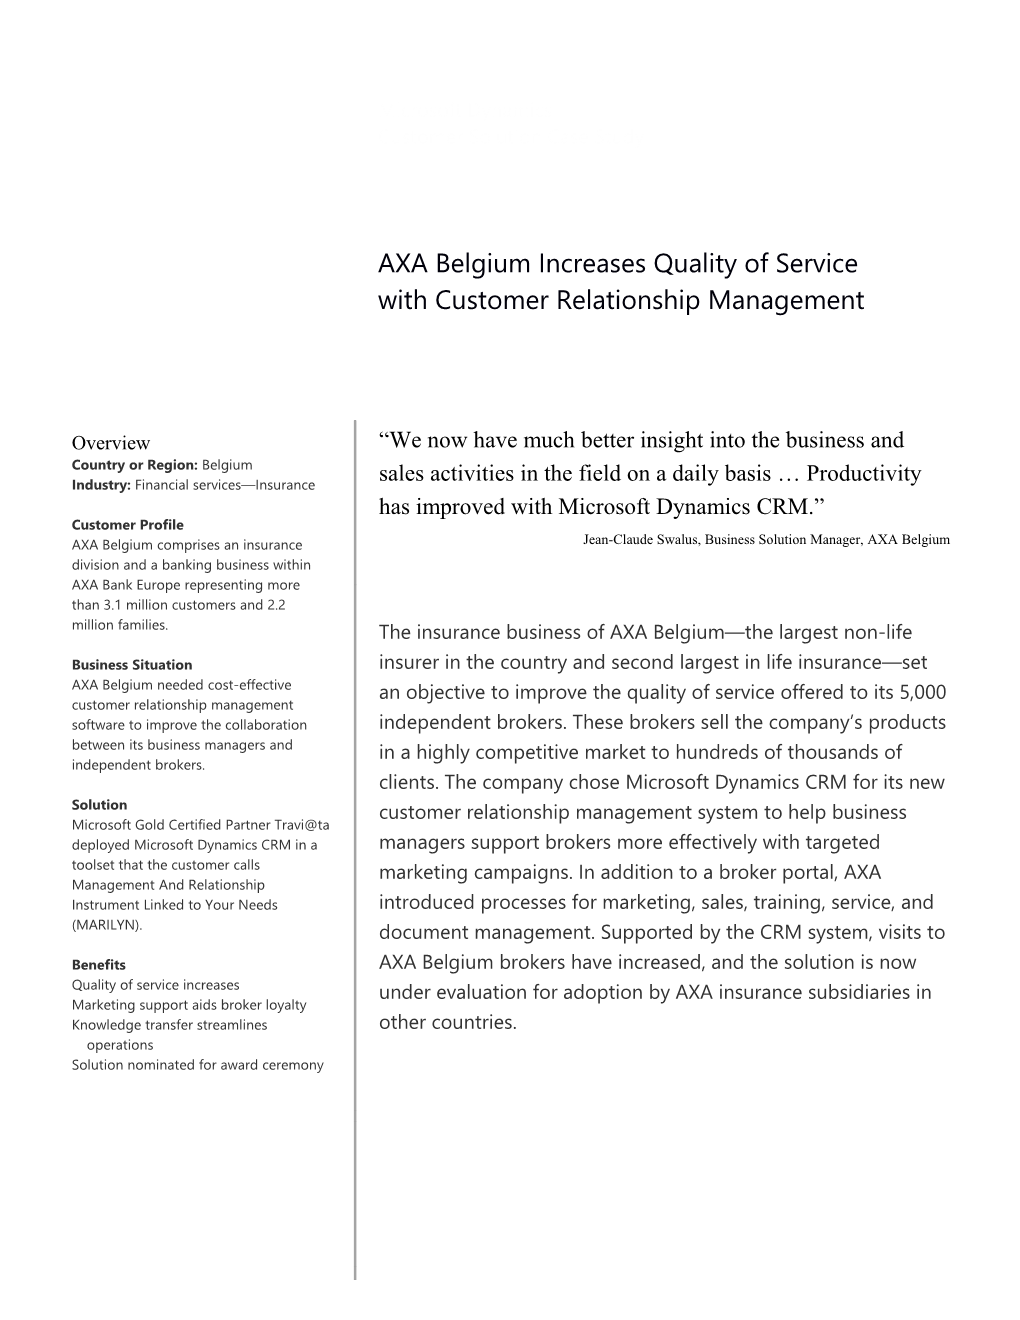 Metia CEP AXA Belgium Increases Quality of Service with Customer Relationship Management